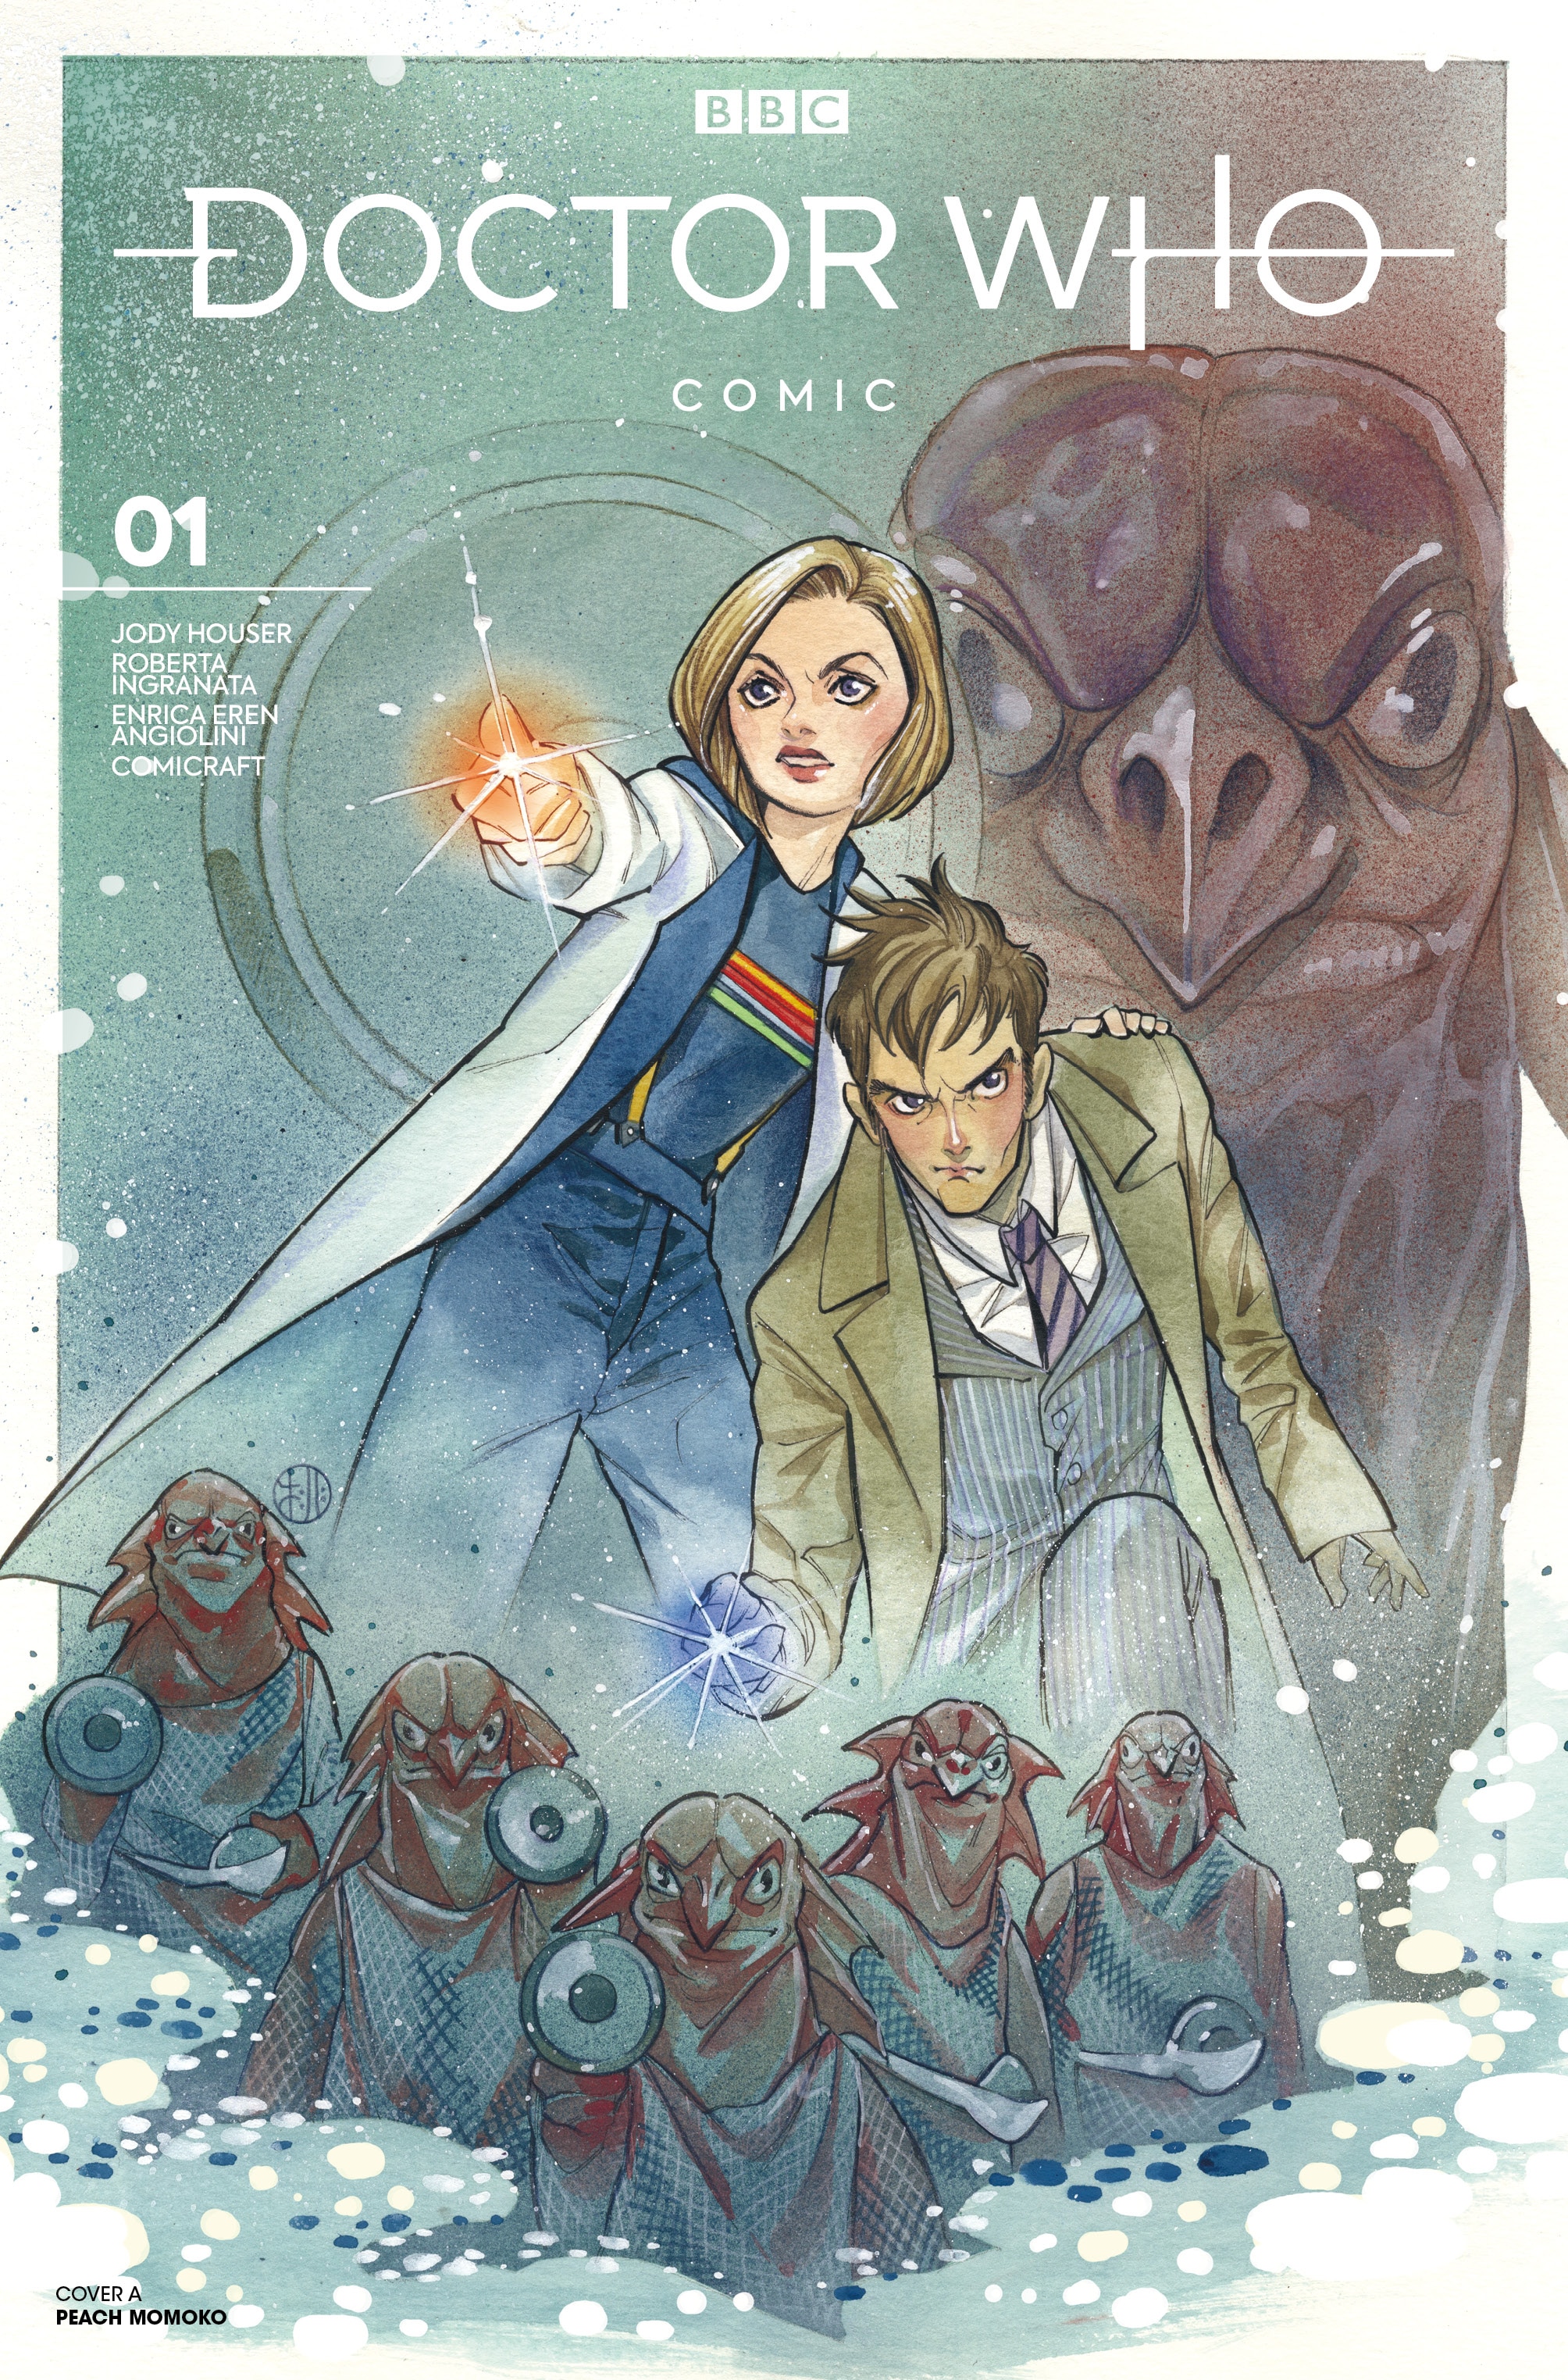 The Thirteenth Doctor and Tenth Doctor comic